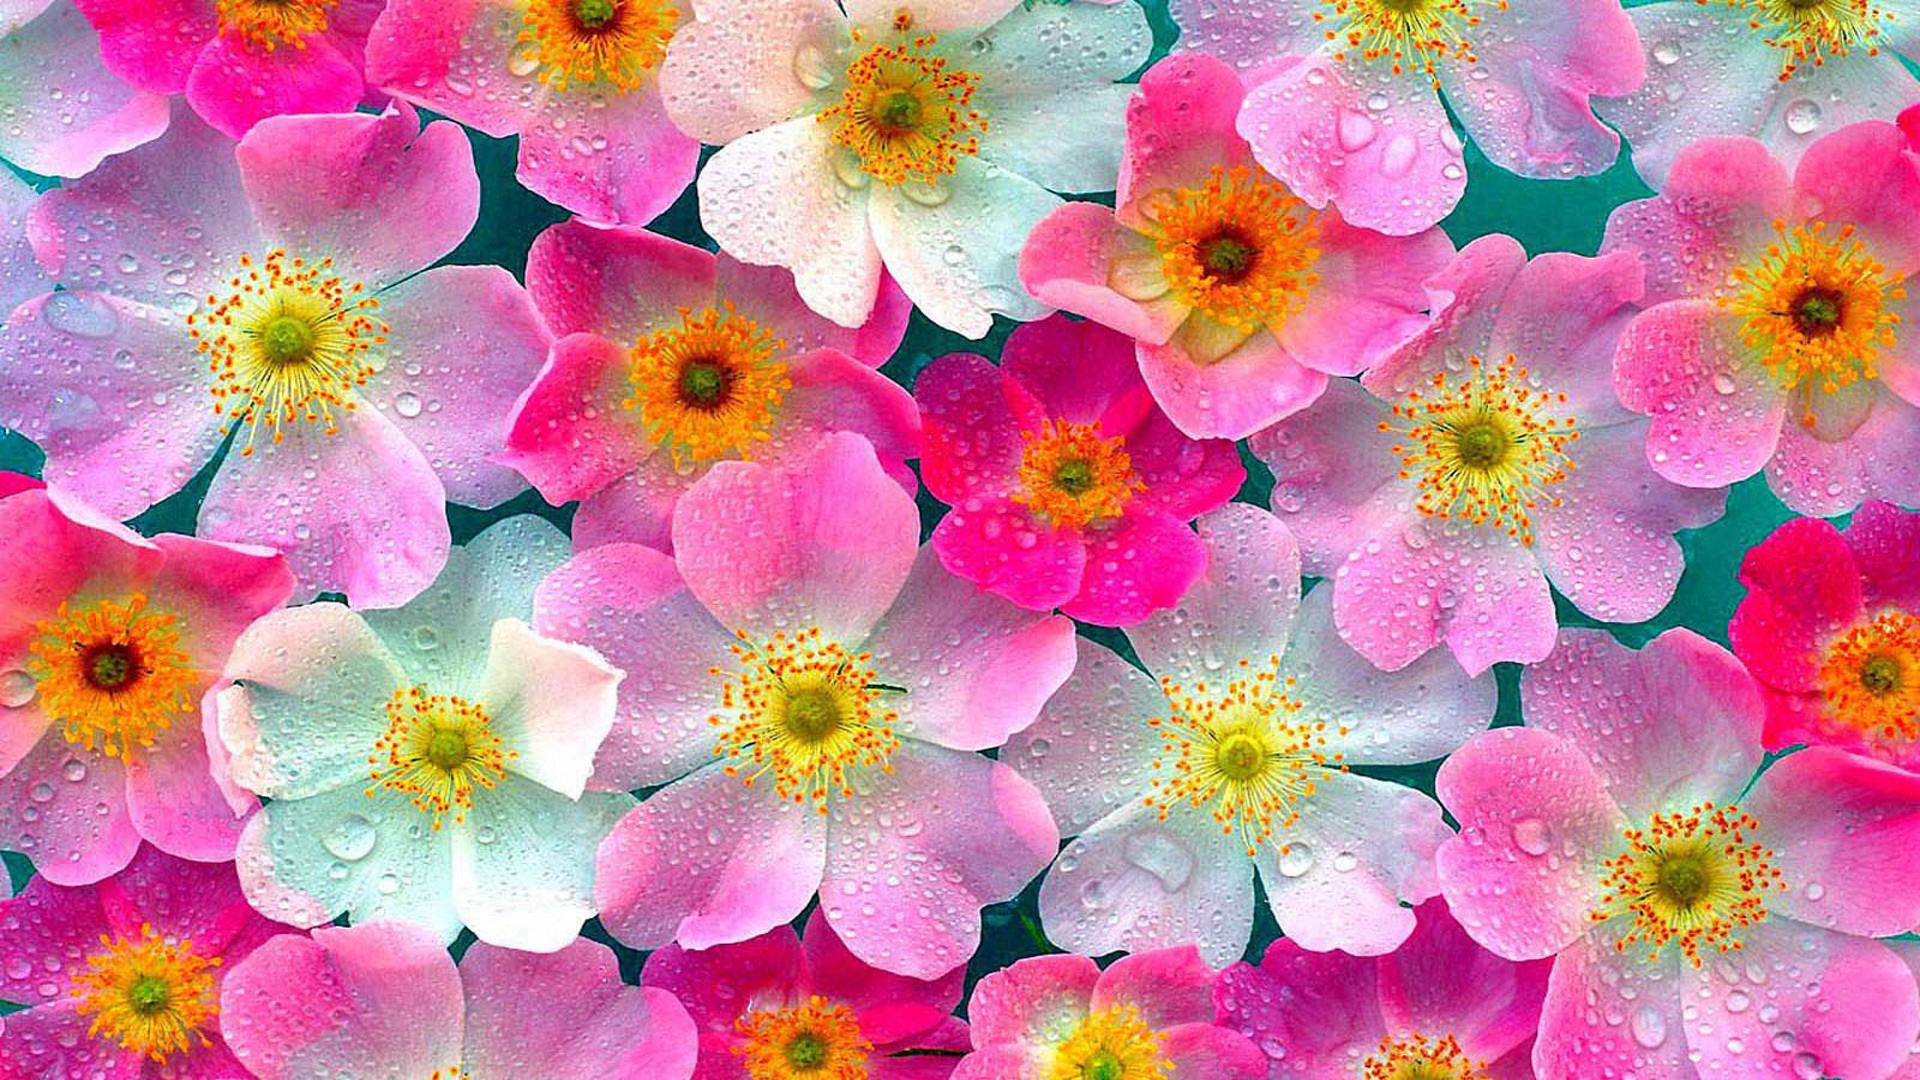 Nature Flowers Wallpapers Images Photos Pictures Backgrounds